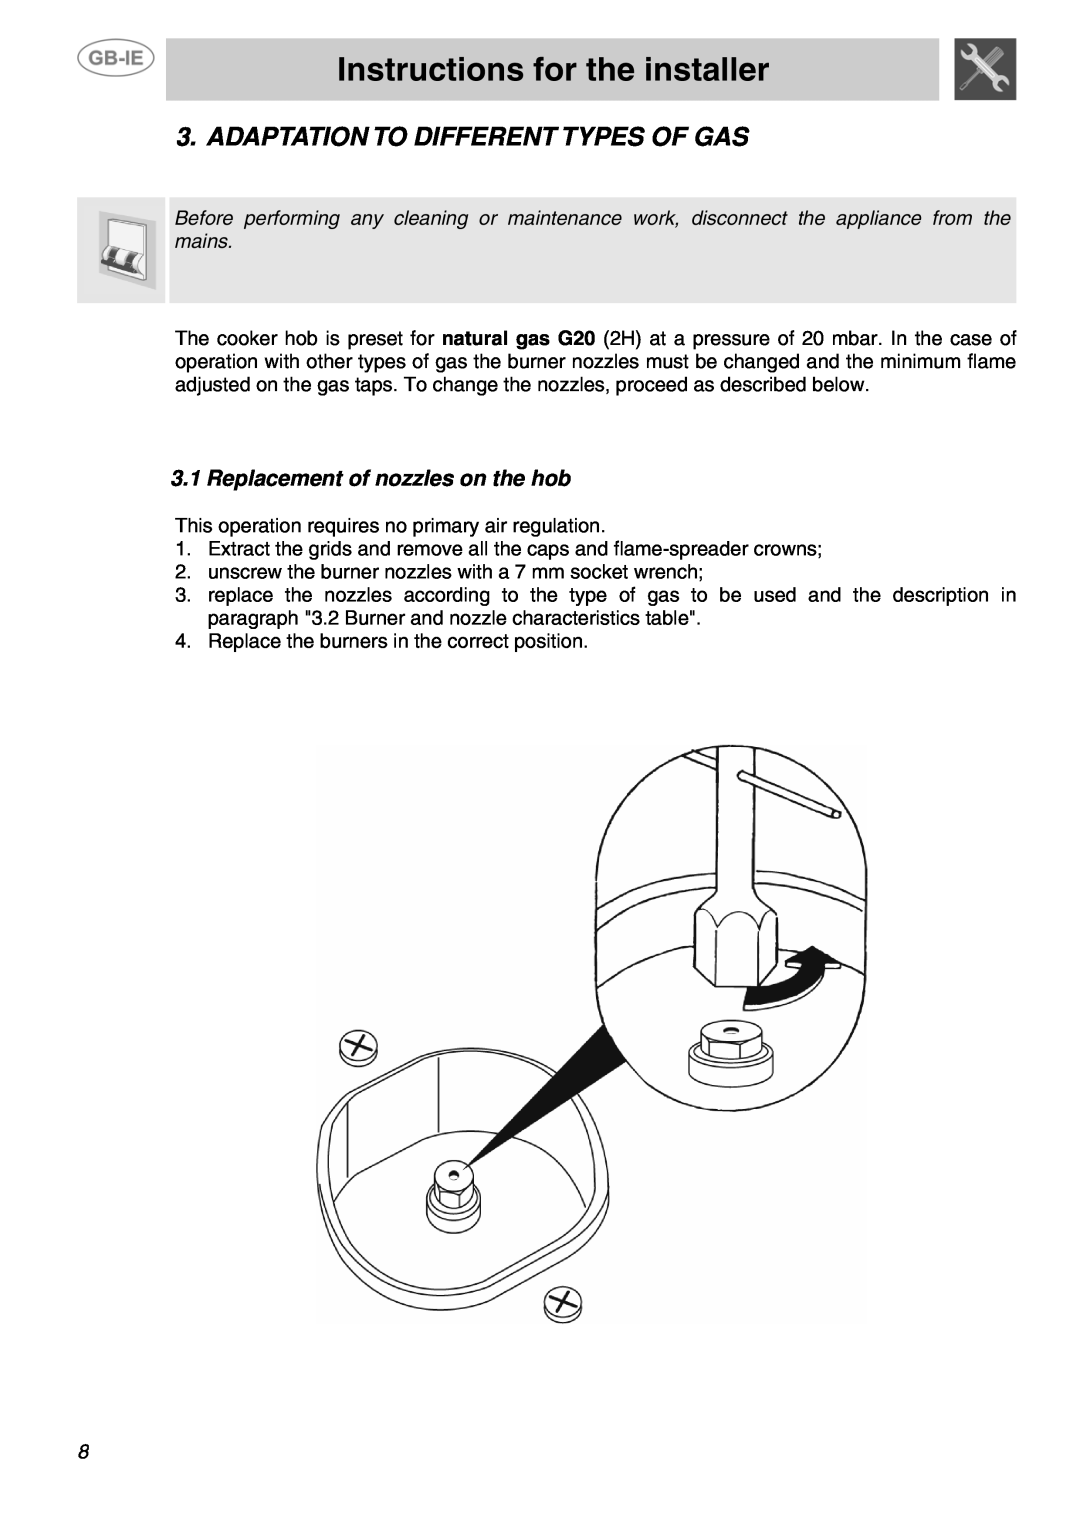 Smeg SUK90MFX5 Adaptation To Different Types Of Gas, Replacement of nozzles on the hob, Instructions for the installer 